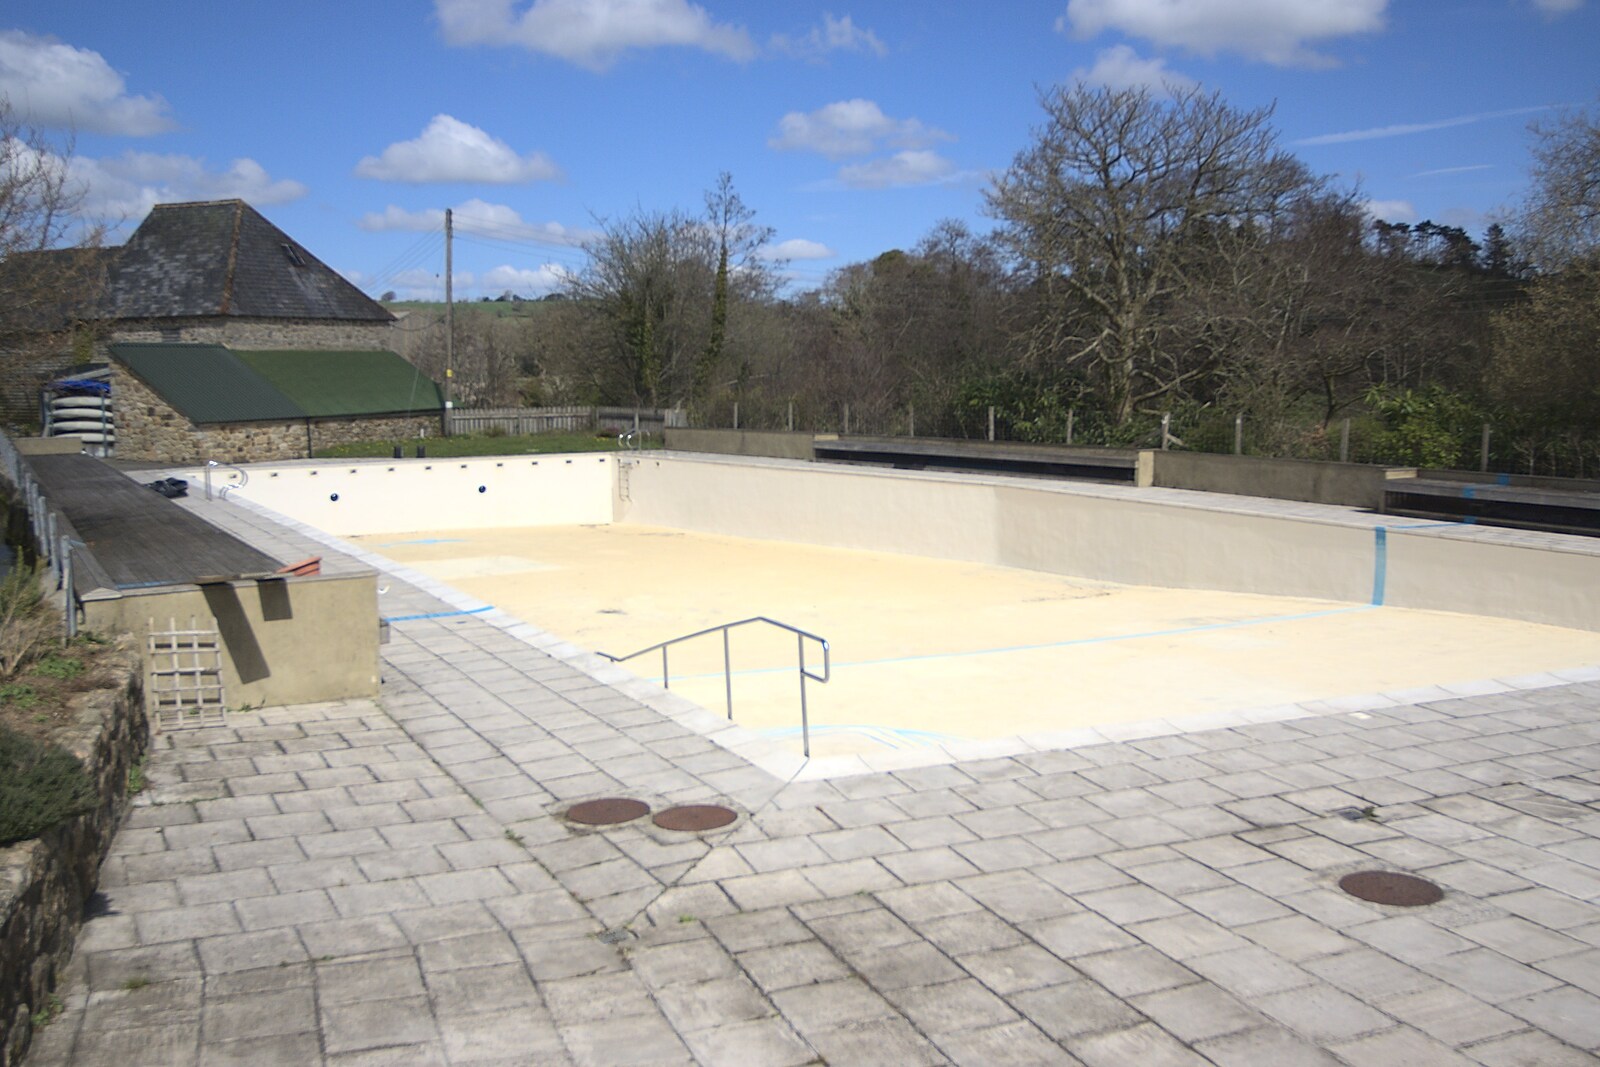 The empty Chagford Lido from An Easter Weekend in Chagford, Devon - 12th April 2009